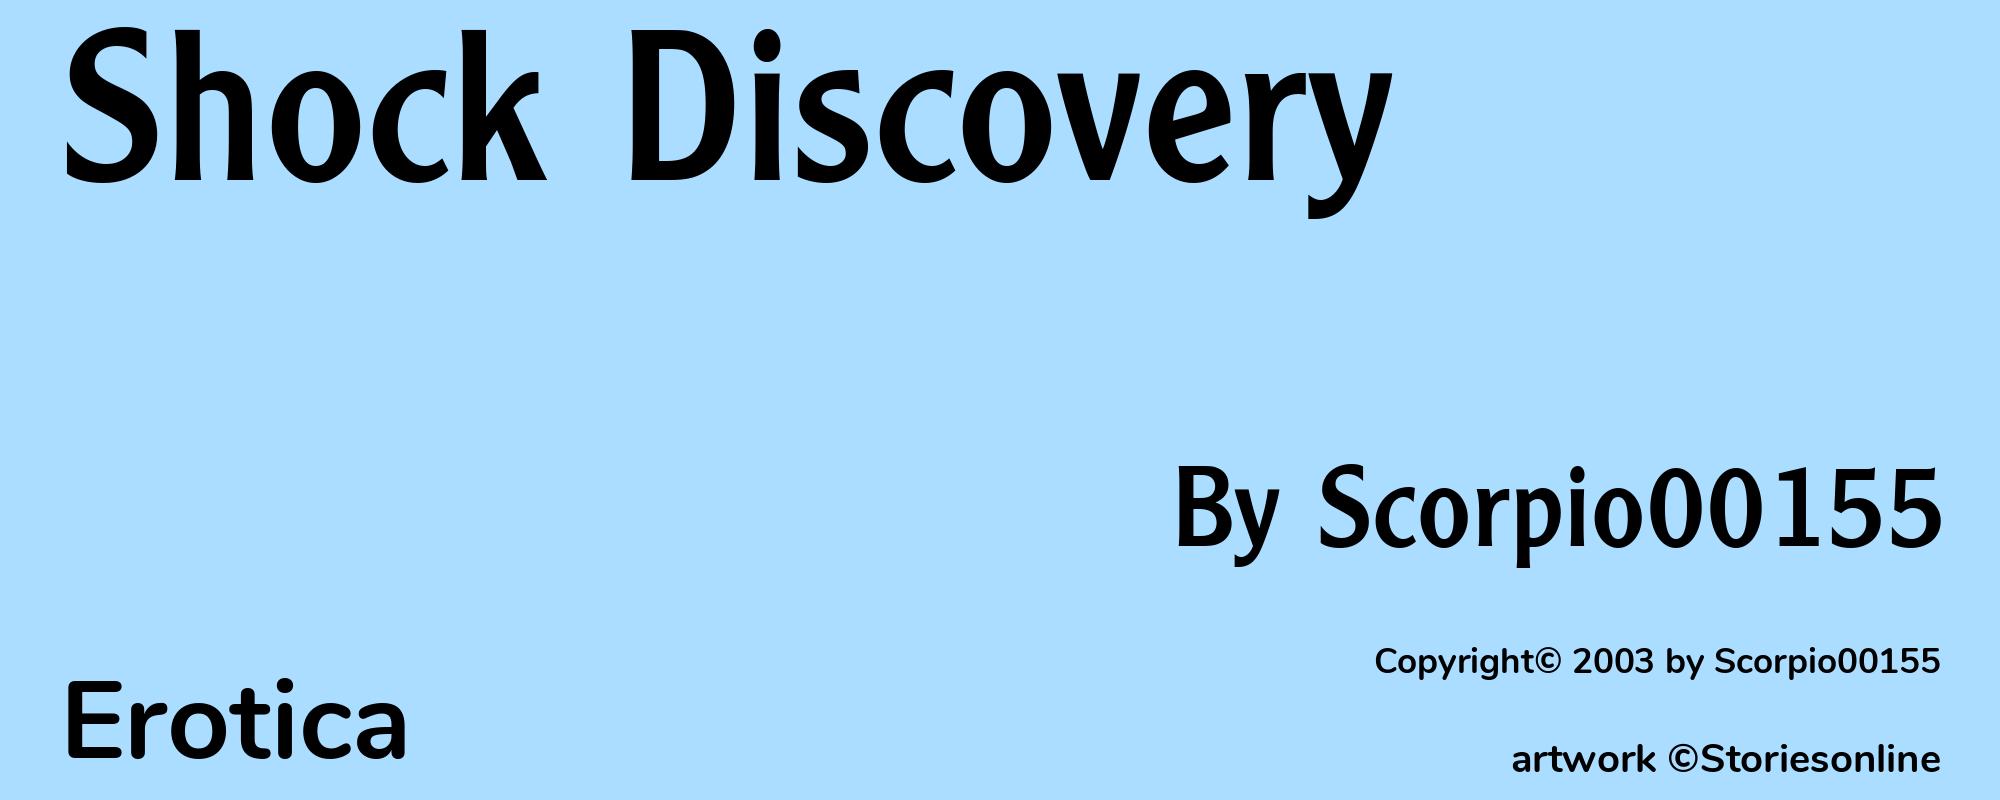 Shock Discovery - Cover